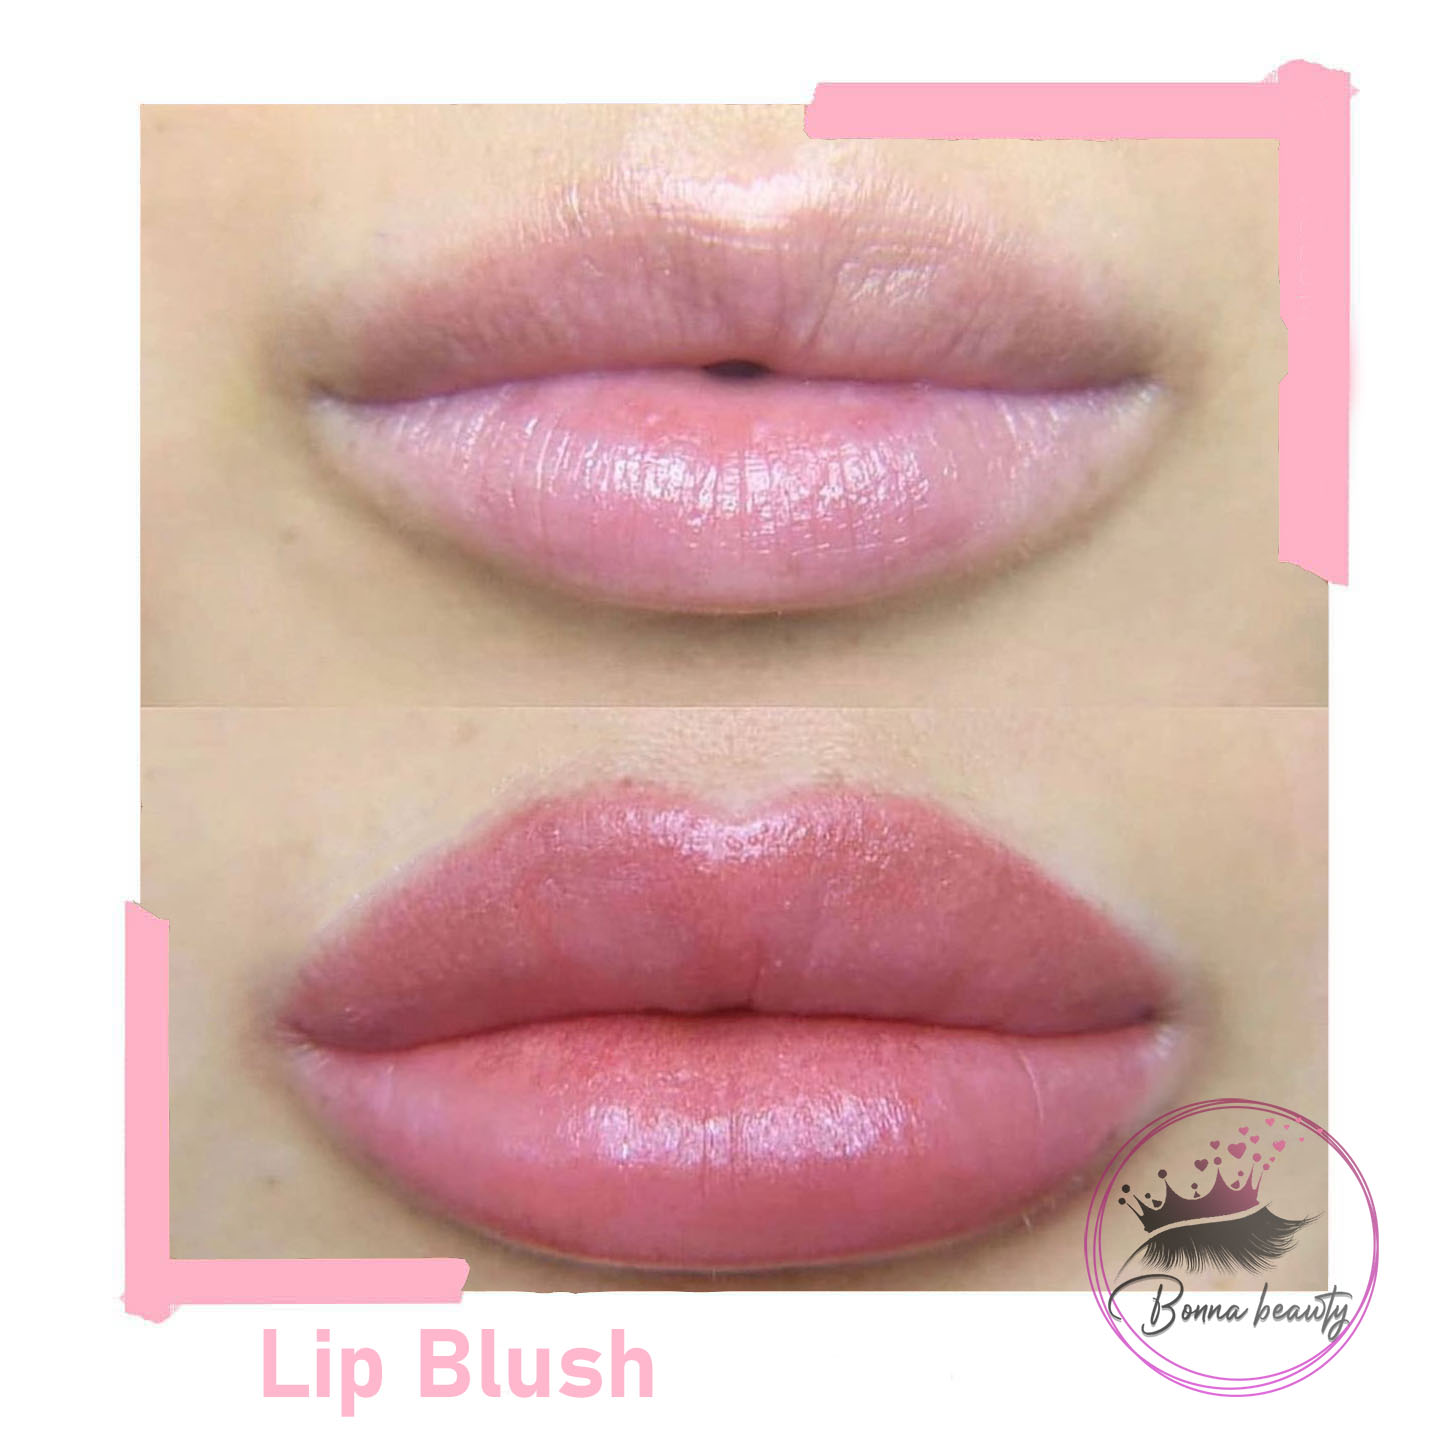 How to prepare for Lip Blush Tattooing before procedure?